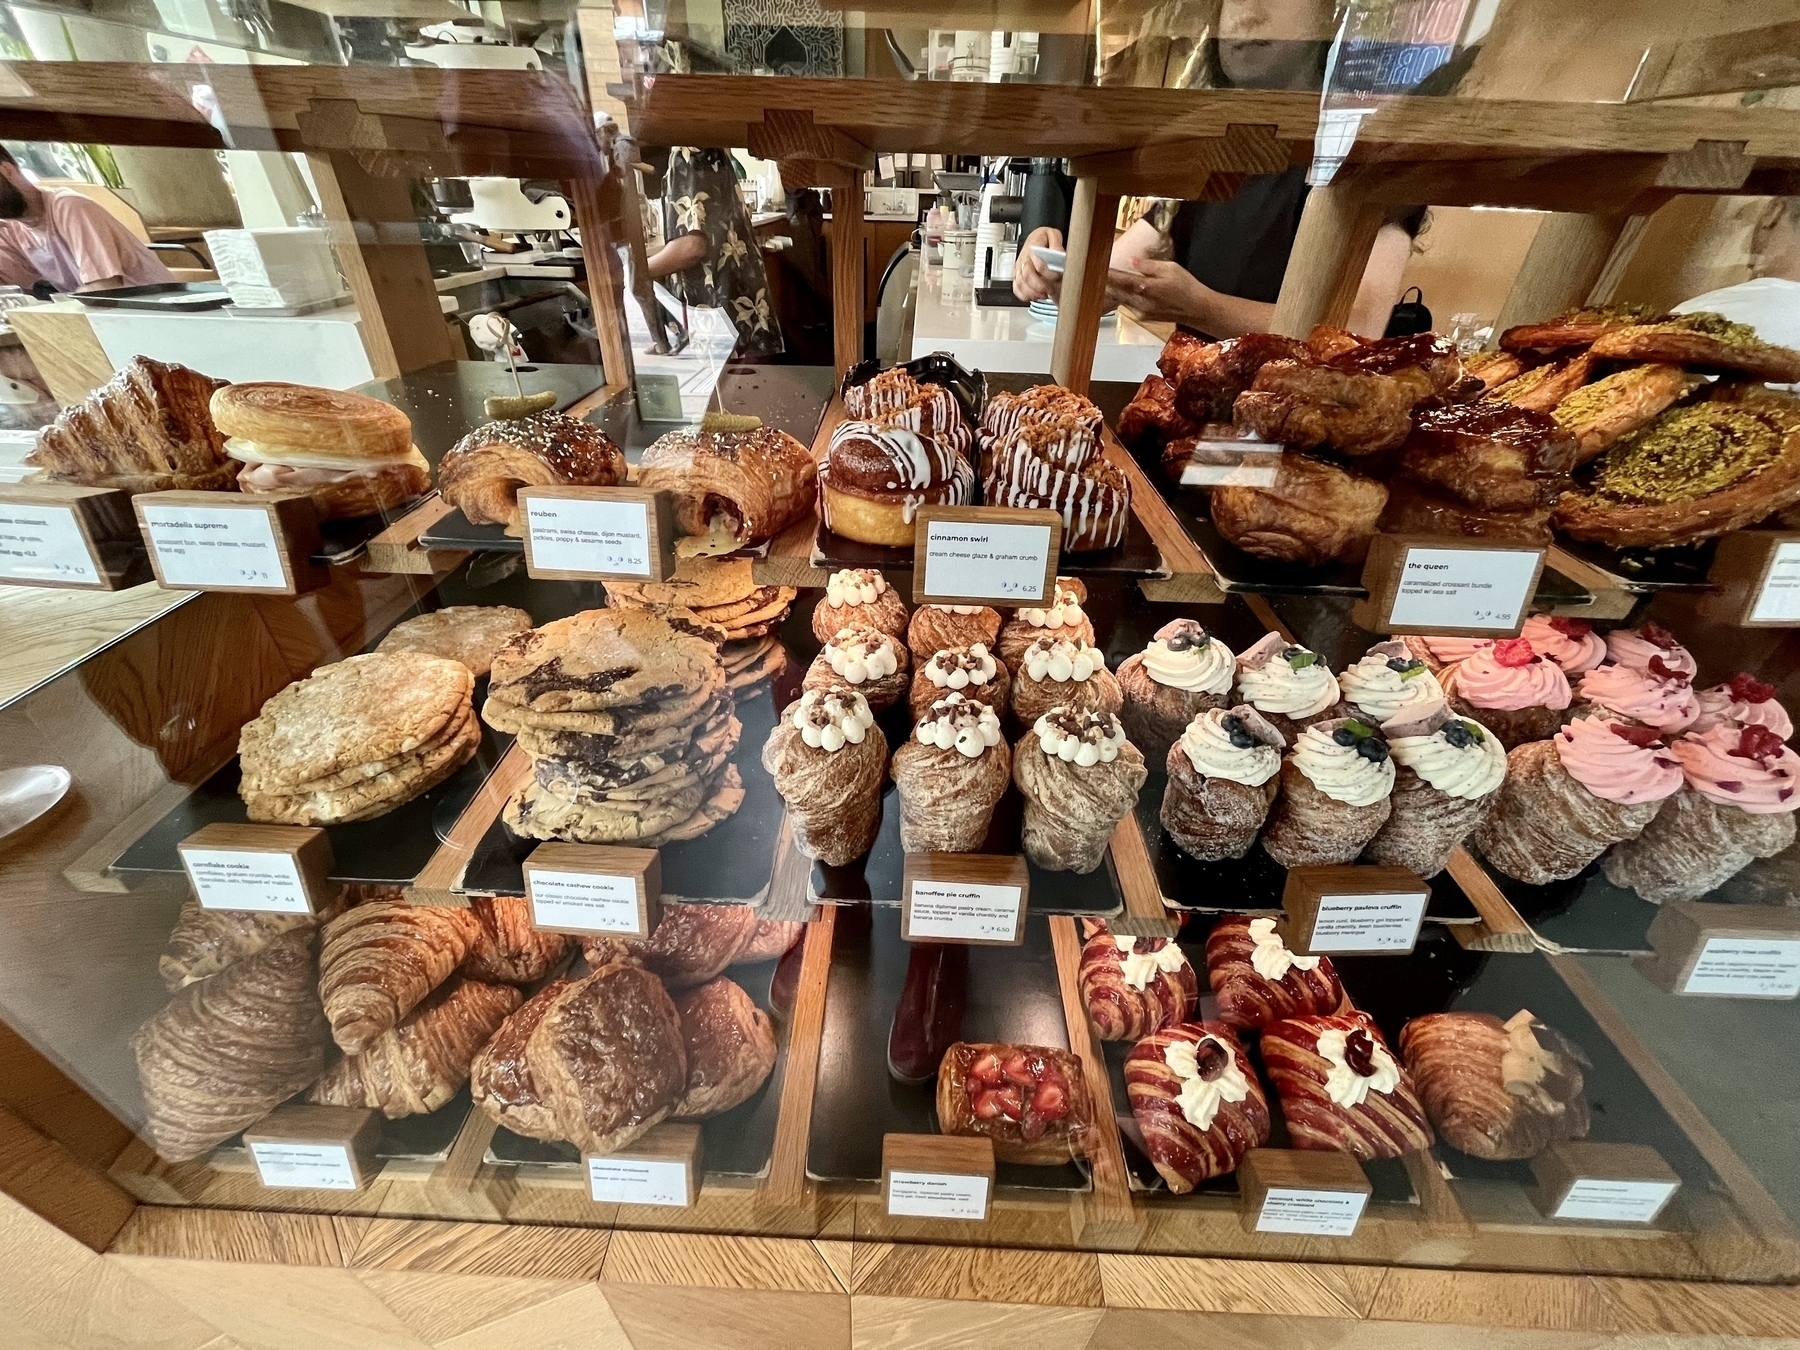 Wide angle photo of the glass display of pastries at the counter of Nemesis